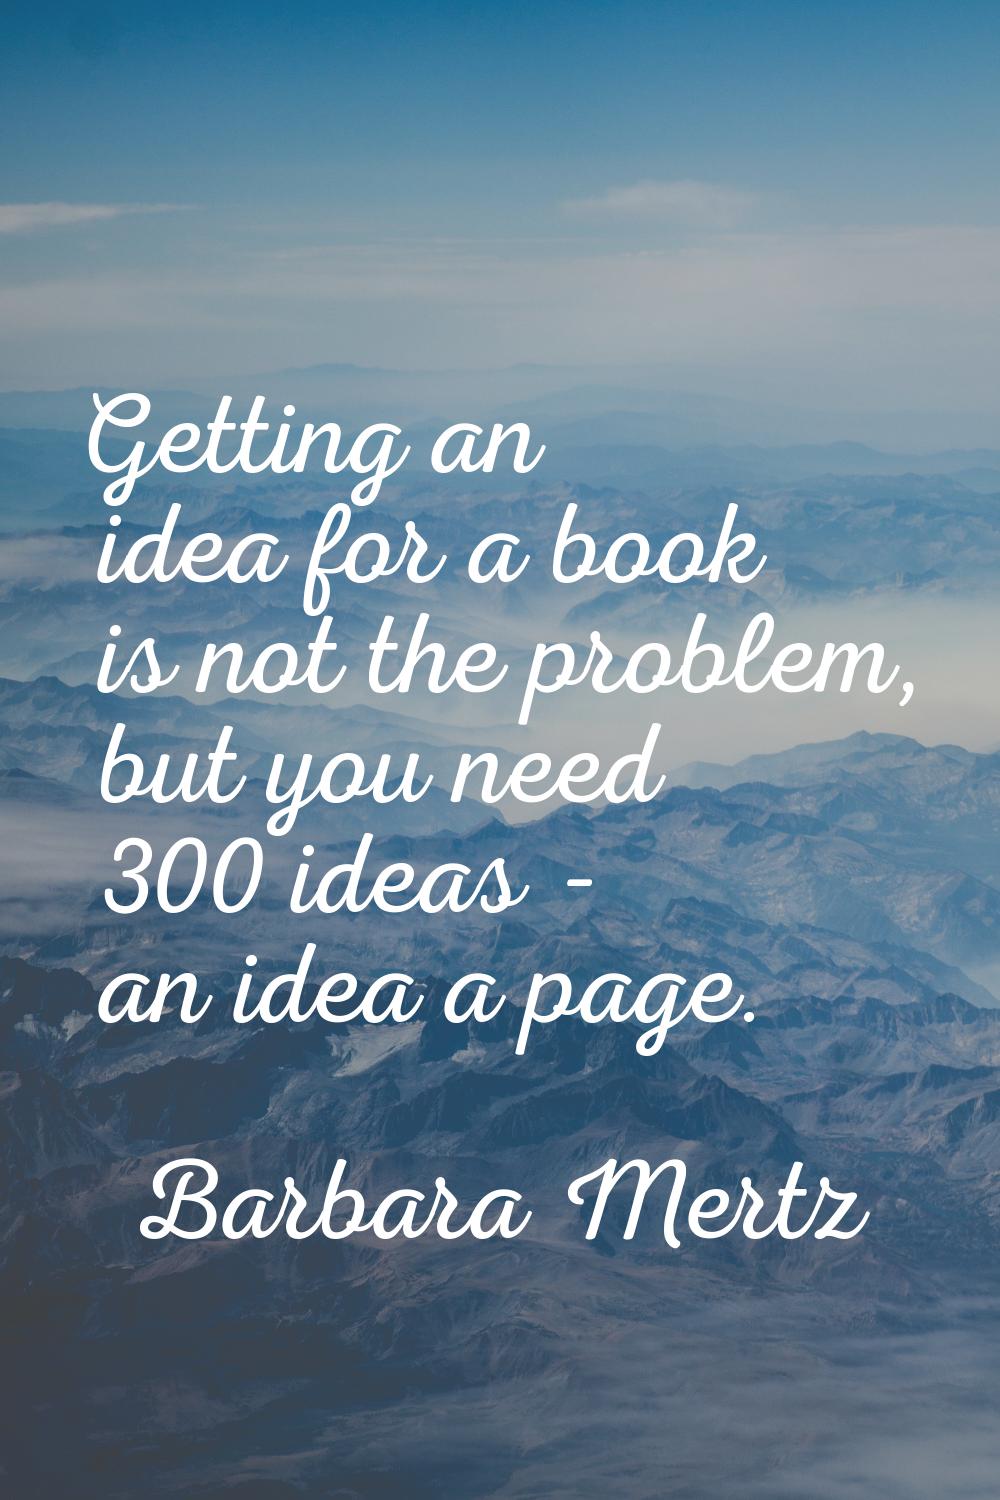 Getting an idea for a book is not the problem, but you need 300 ideas - an idea a page.